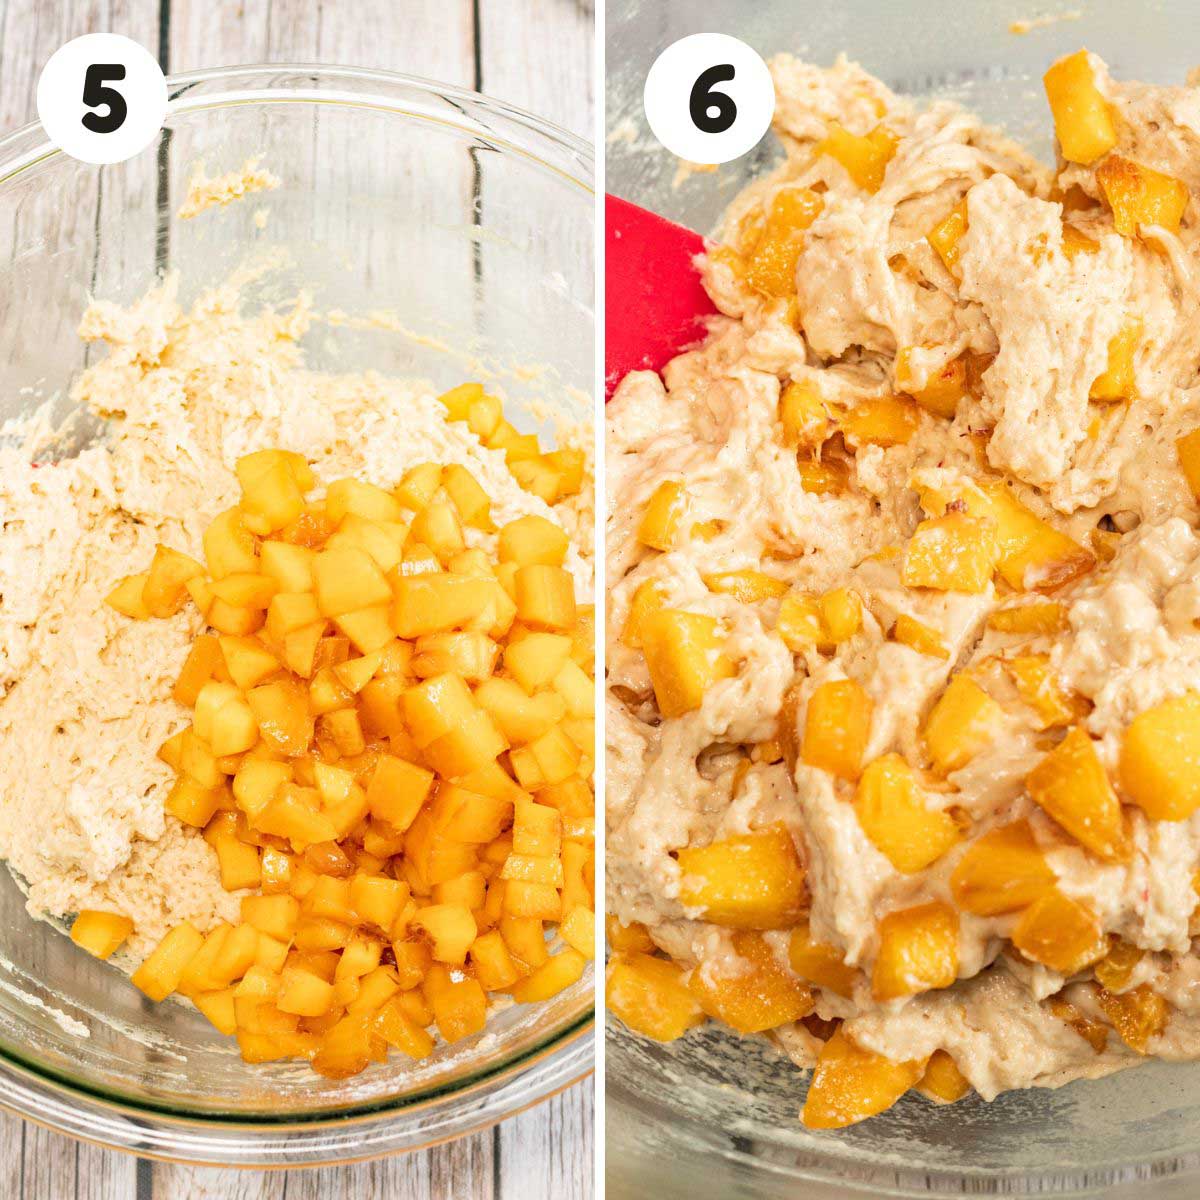 two image process making peach streusel bread.